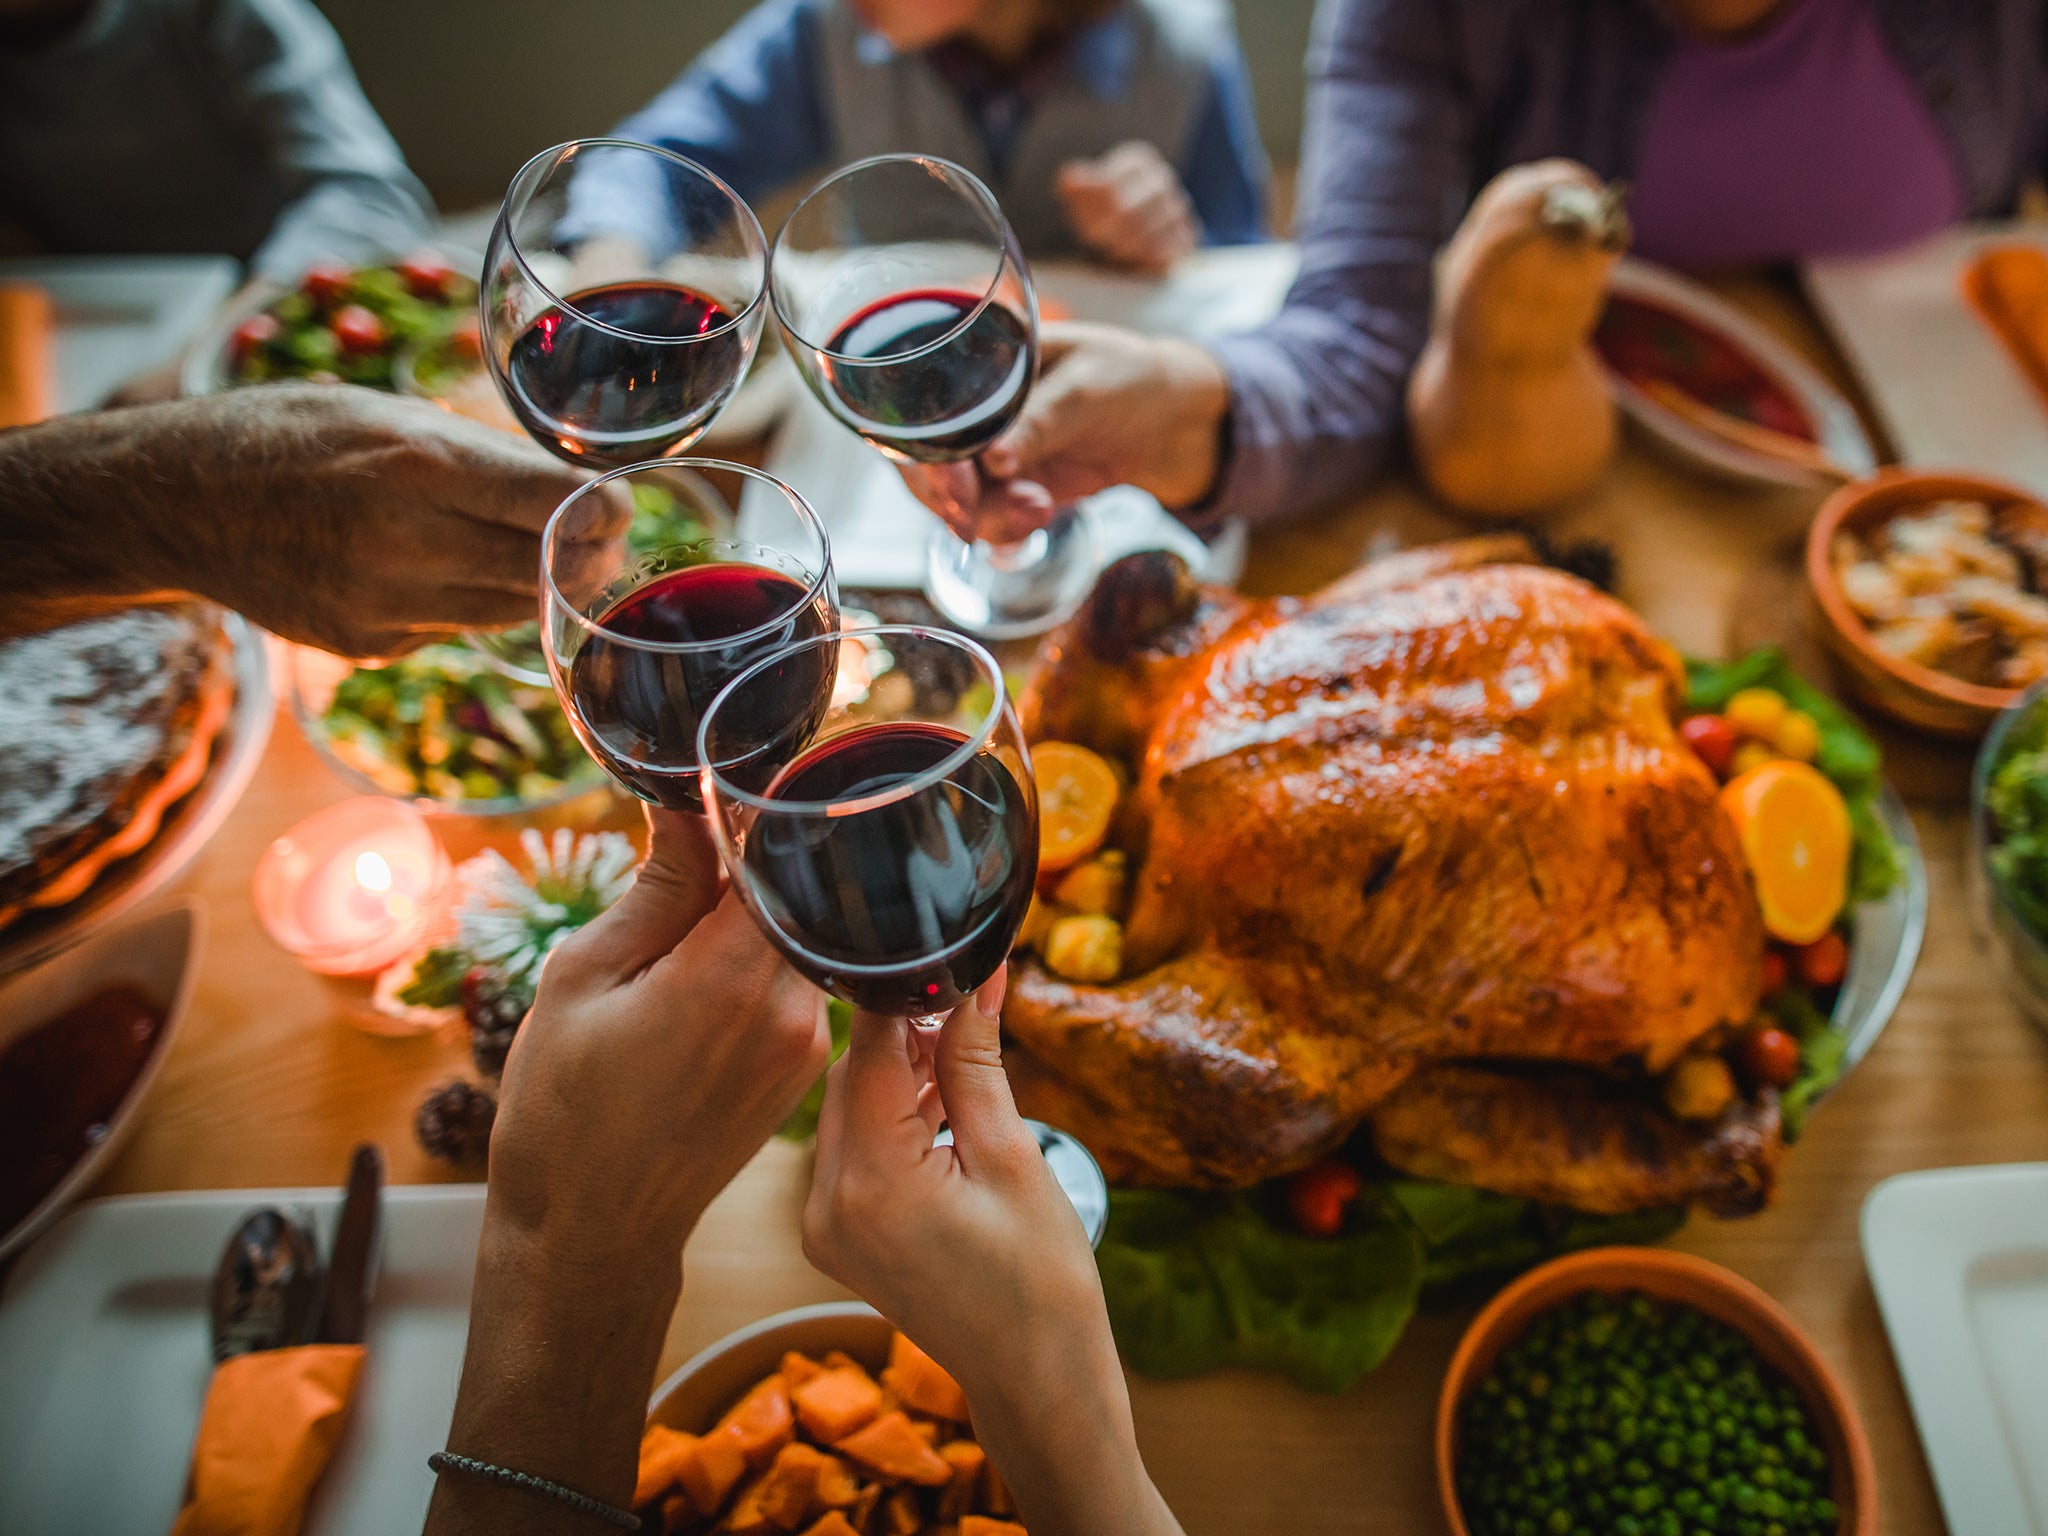 Consider an alternative red with your turkey this year